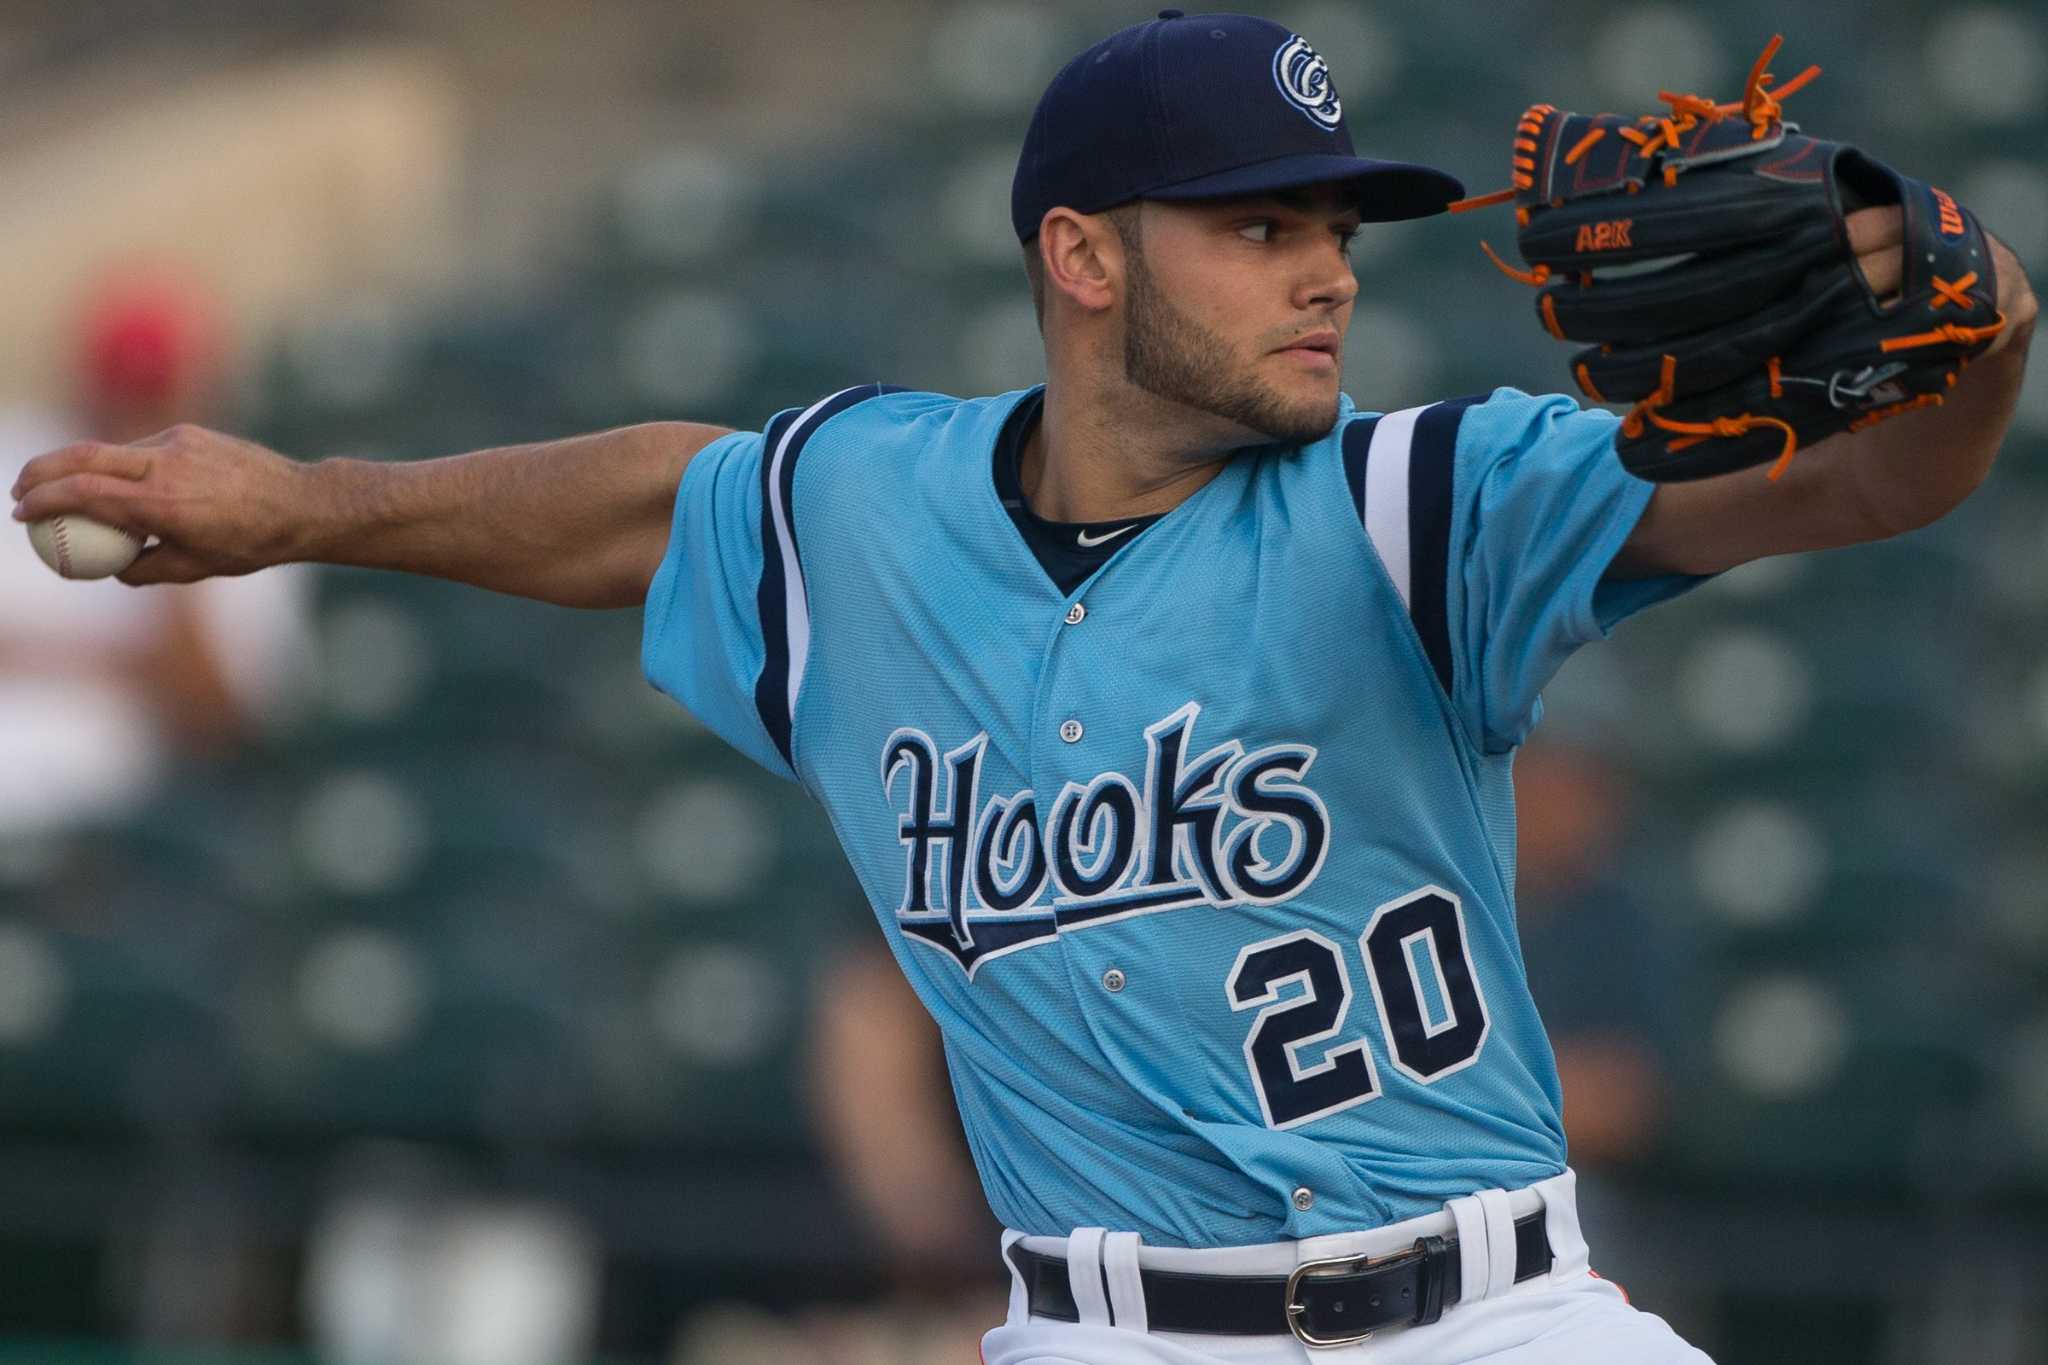 Altuve in the Hooks lineup as they take on Tulsa